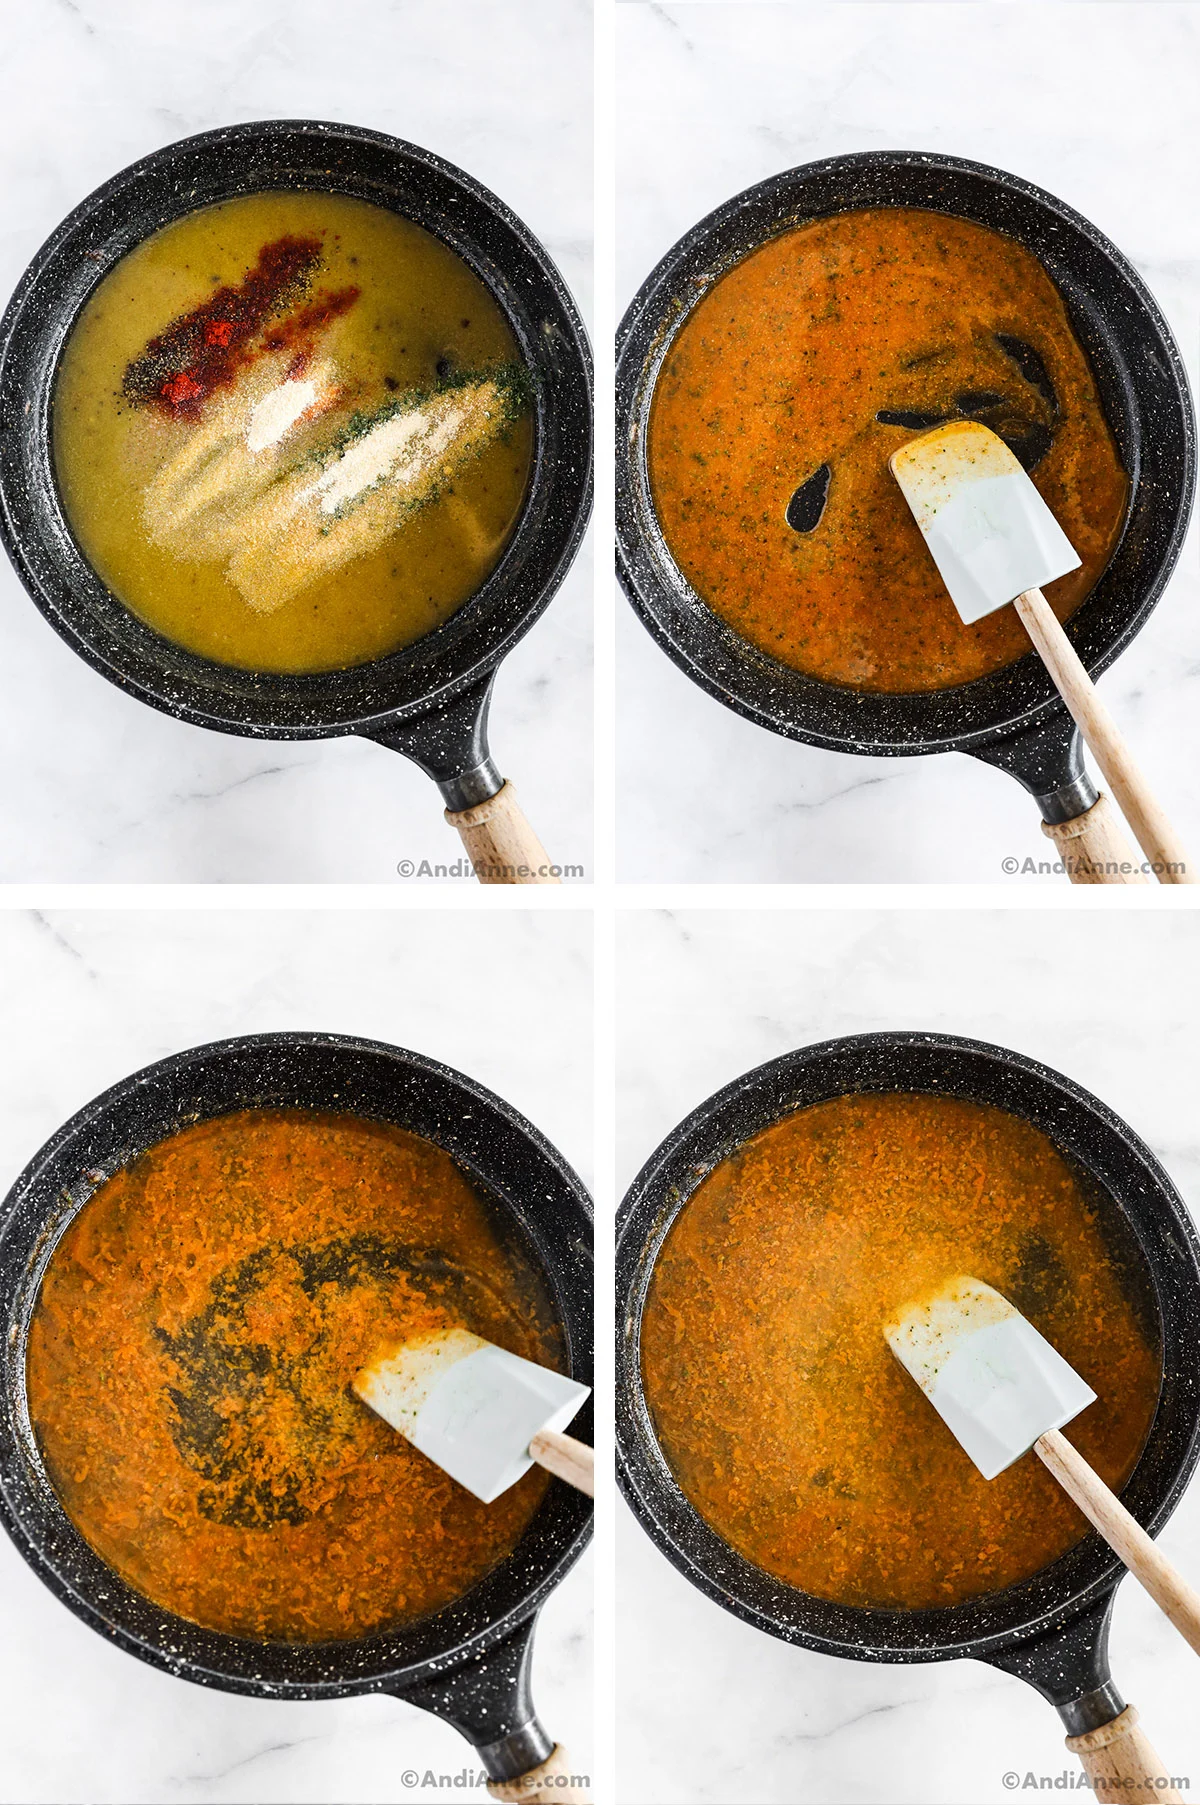 Four images of a frying pan with sauce ingredients at different cooking stages.